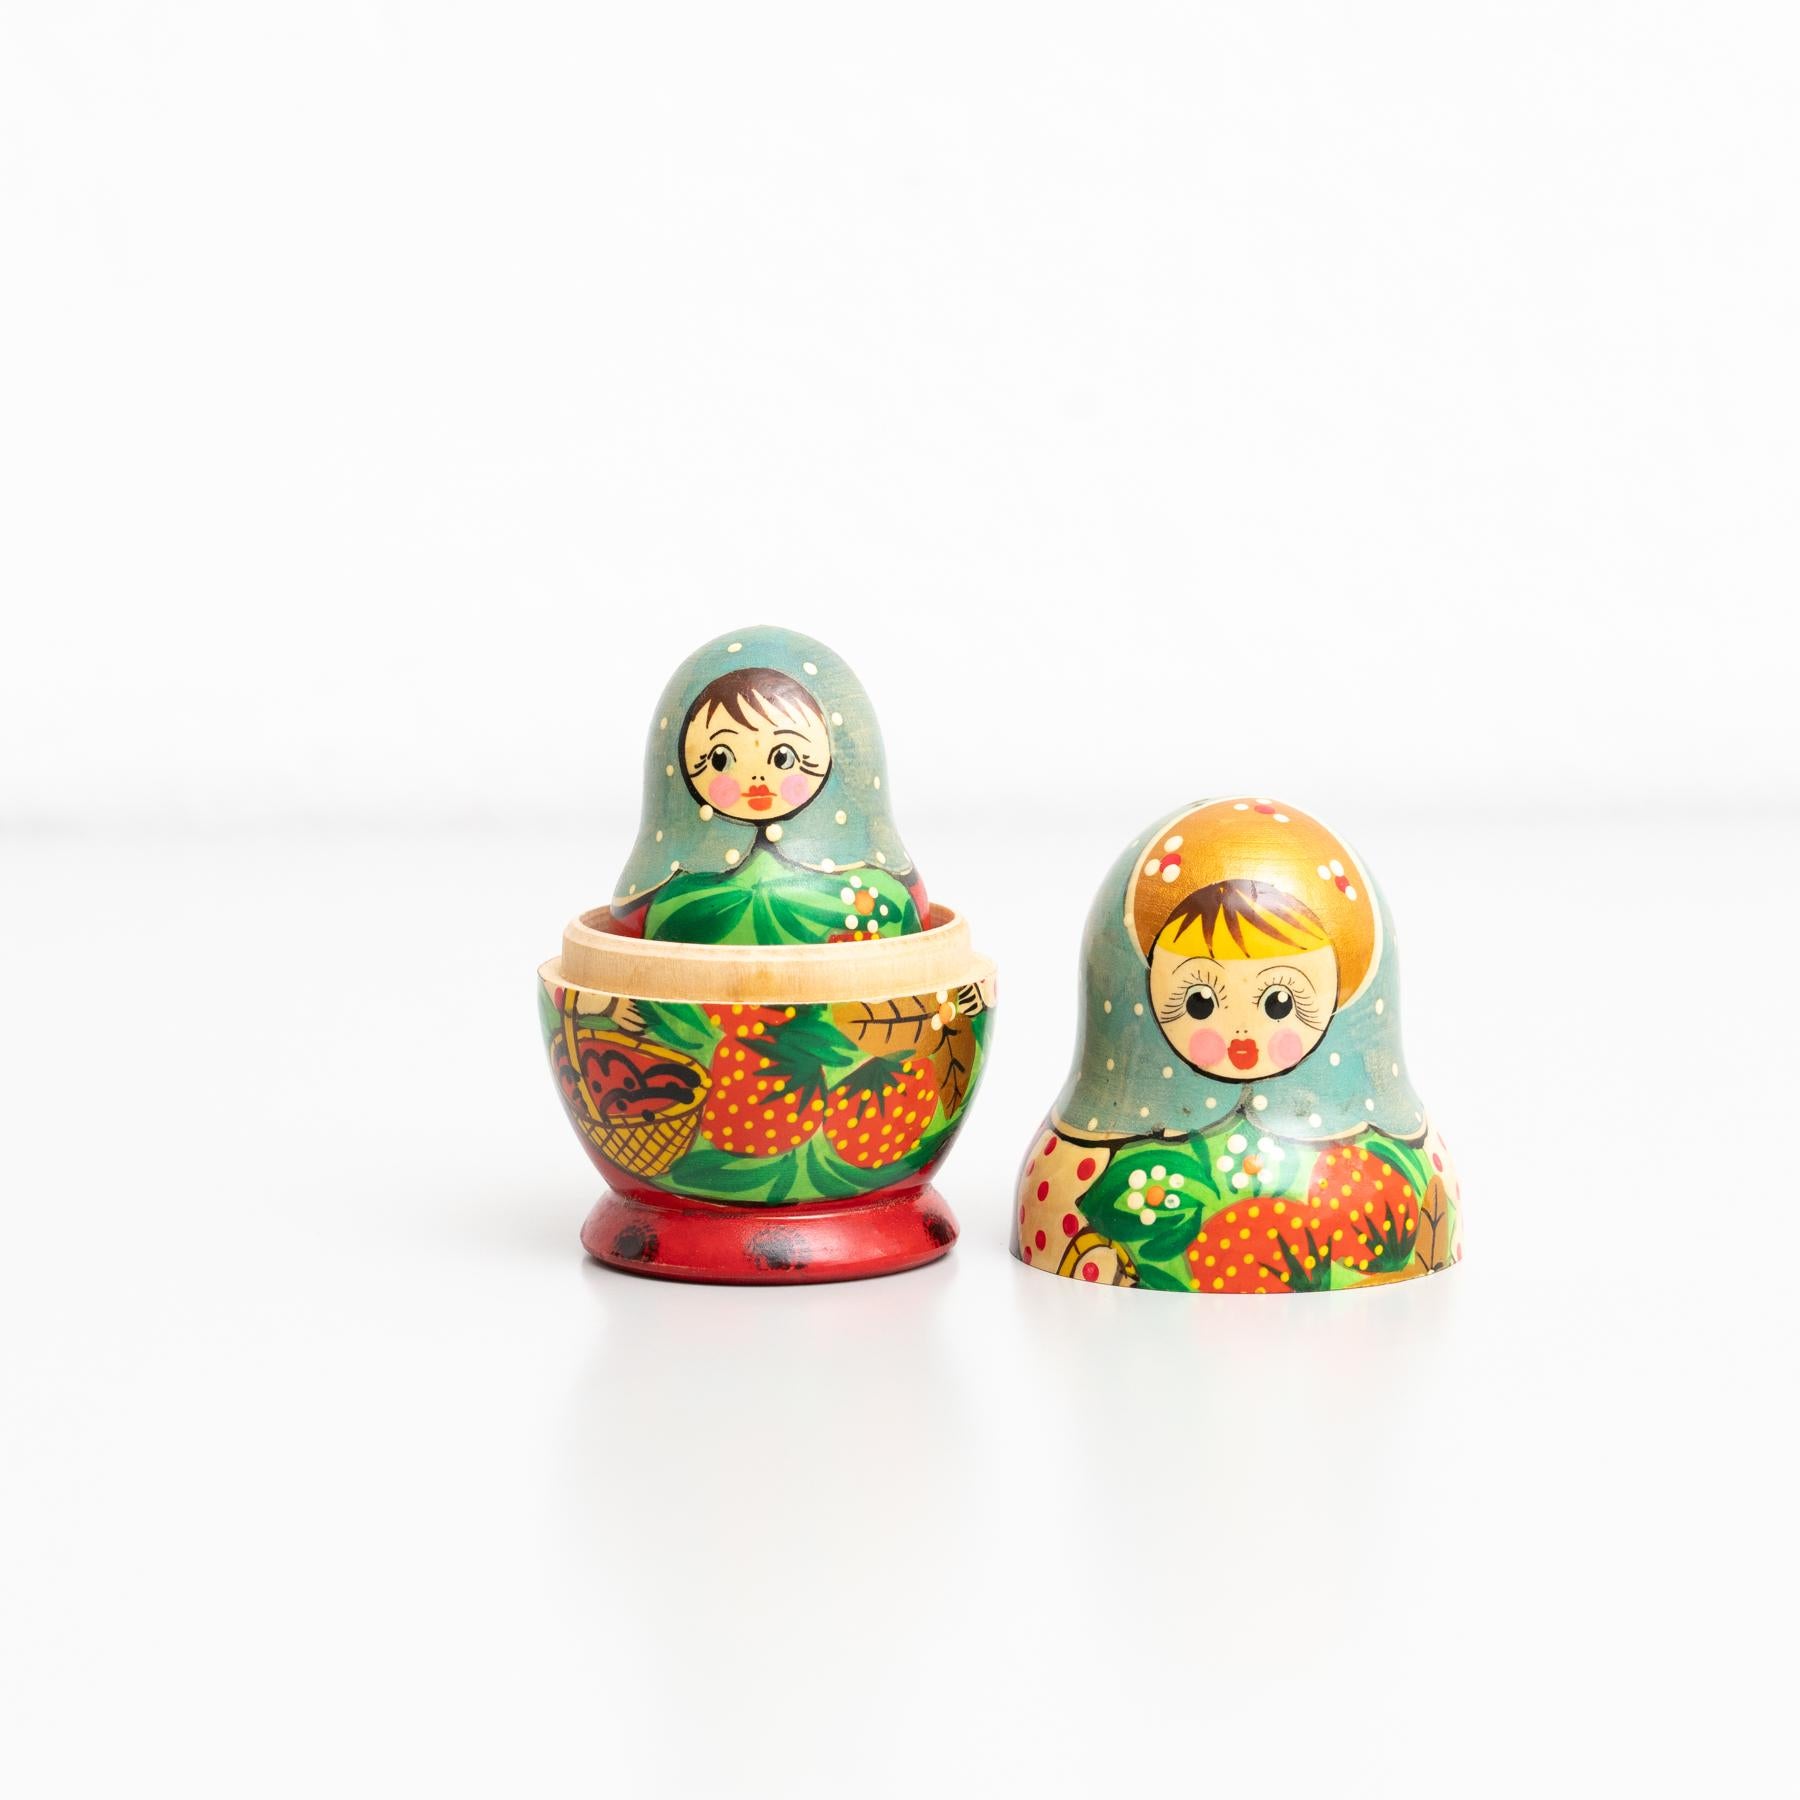 Antique Traditional Hand-Painted Wooden Russian Doll, circa 1960 For Sale 4